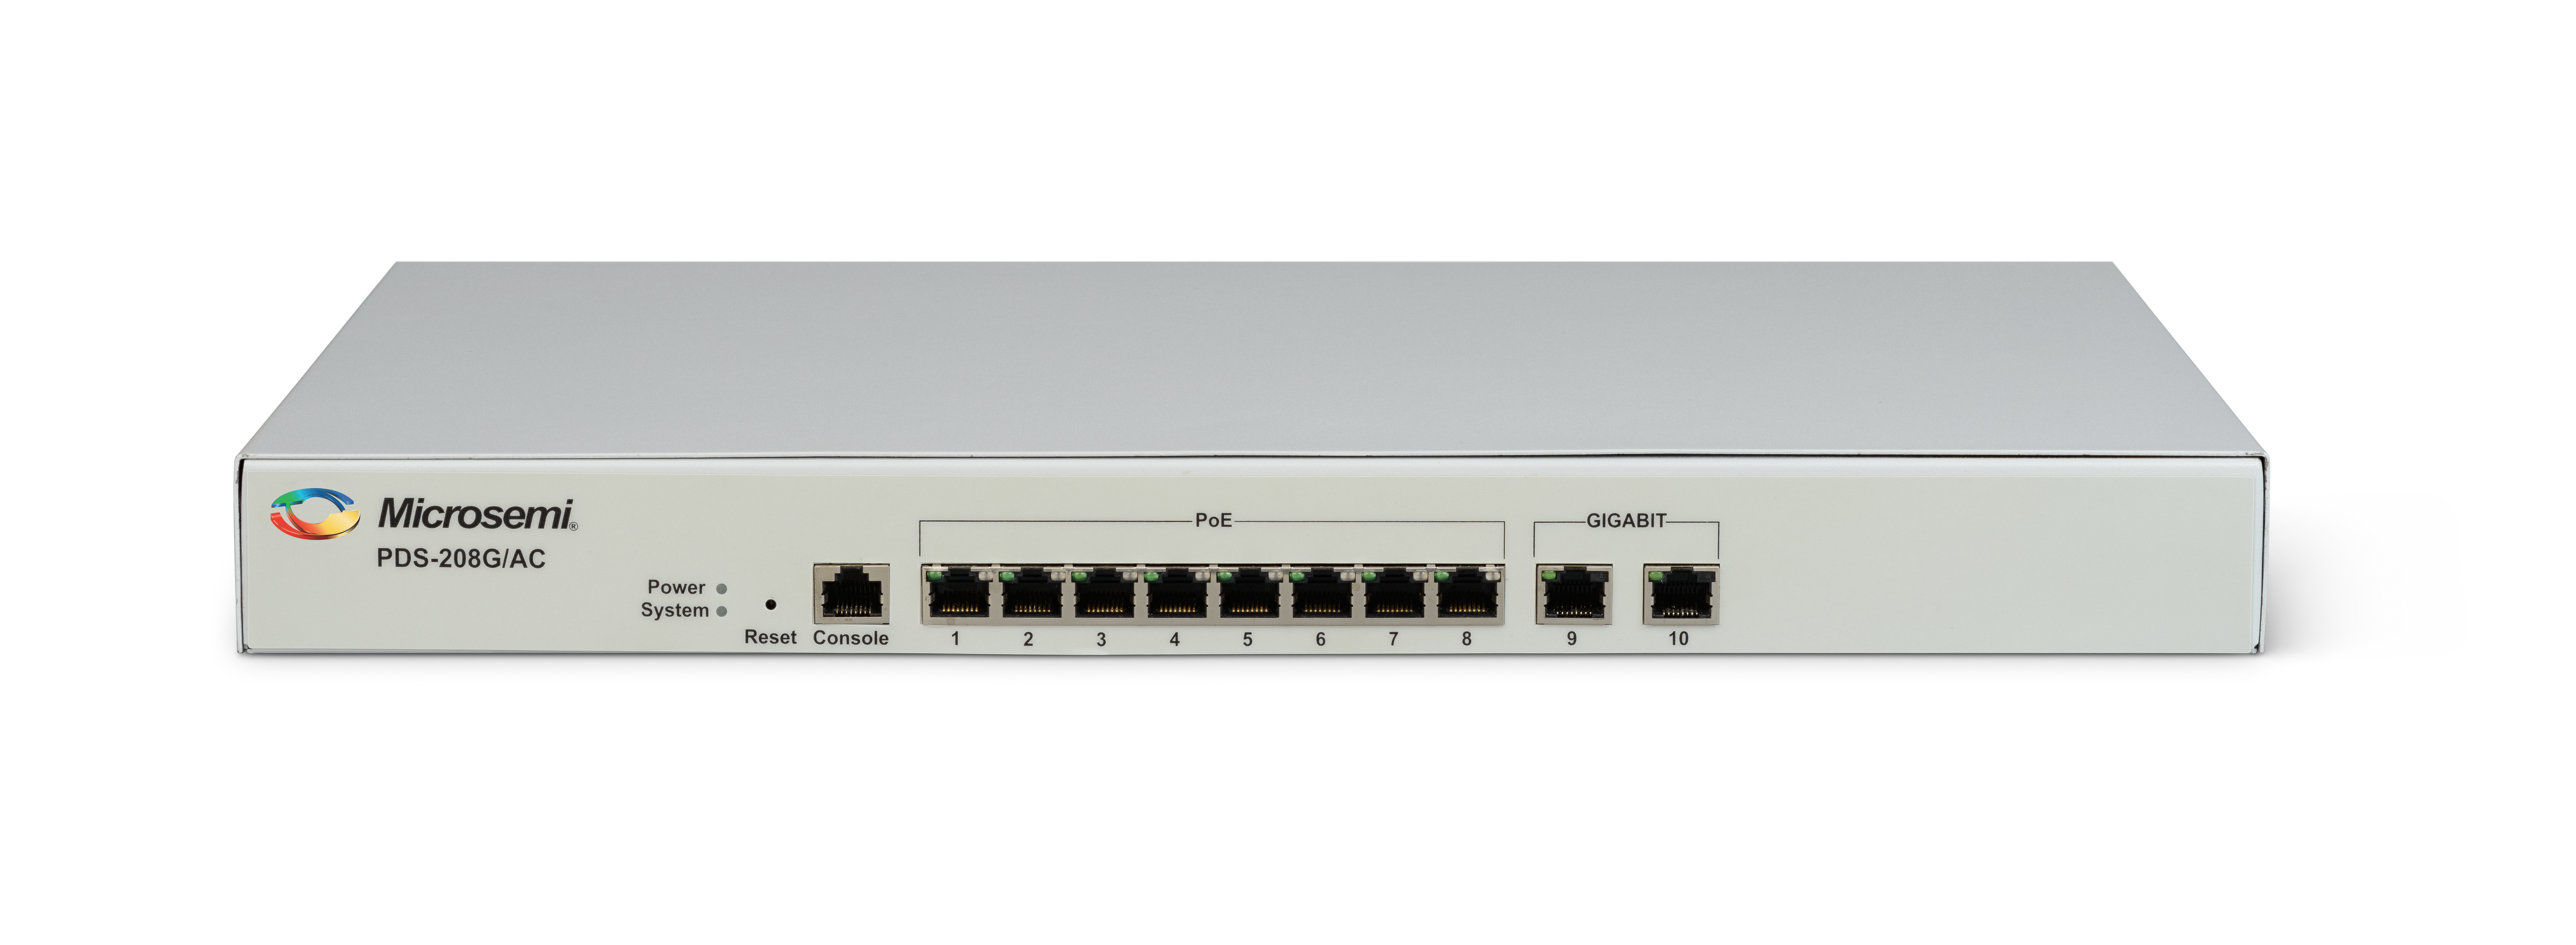 Power-Over-Ethernet Switch Offers Optimal and Cost-Effective Solution for PoE Lighting and Other Digital Ceiling Applications